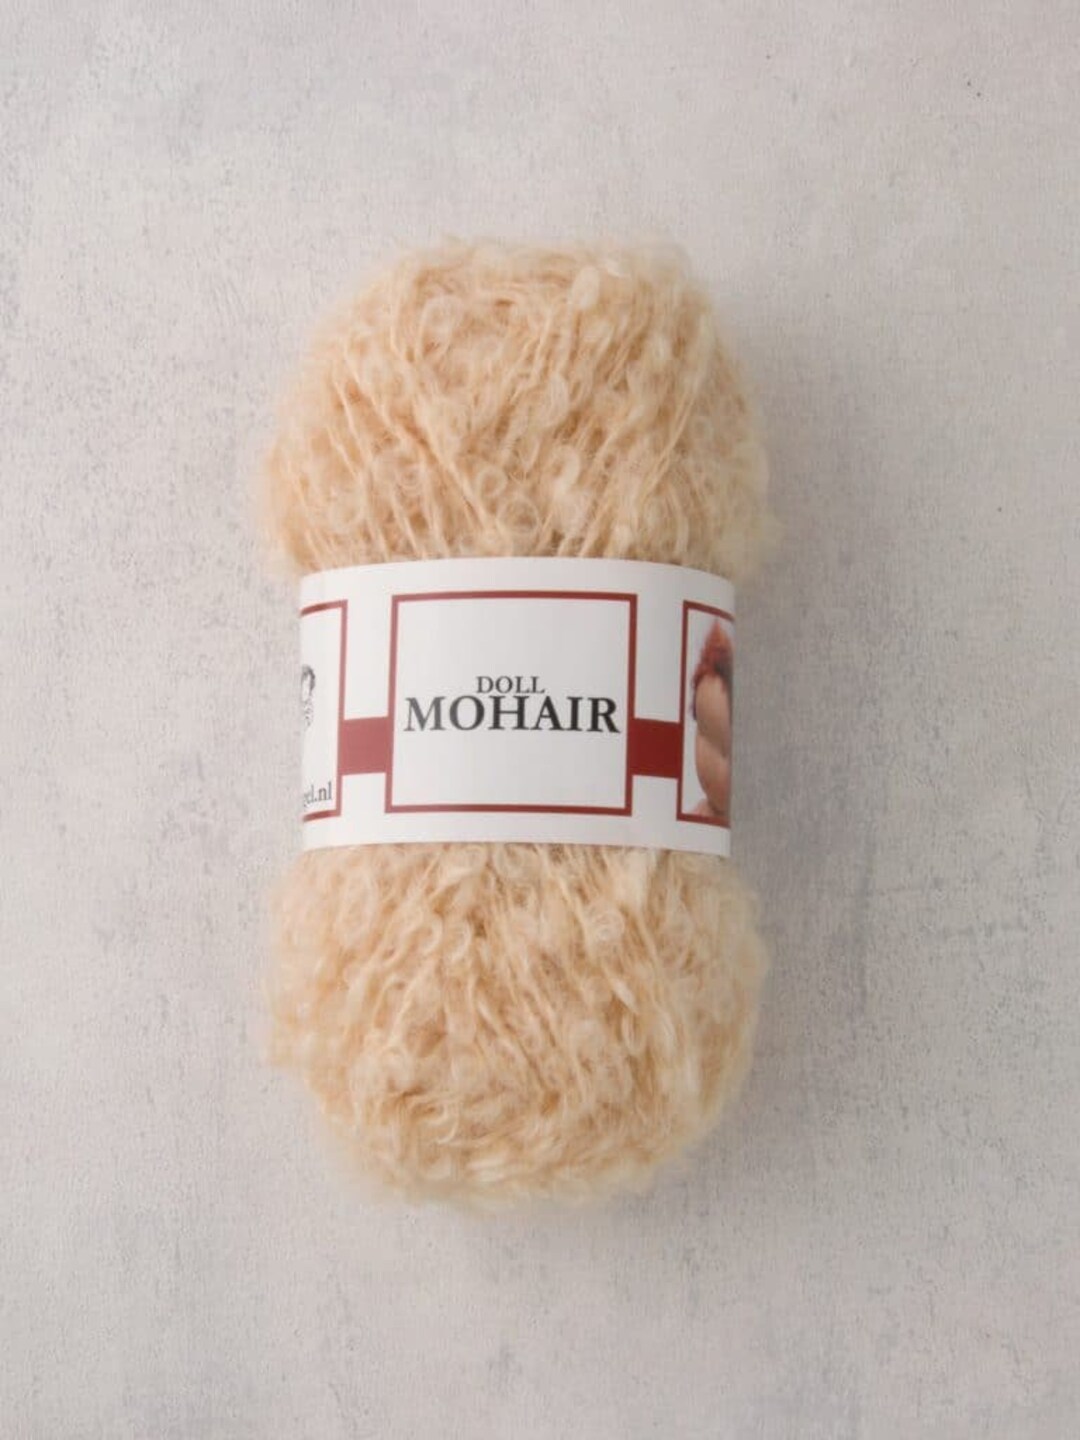 Light Weight Small Loop Boucle Mohair Yarn in Doll Hair Colors 3